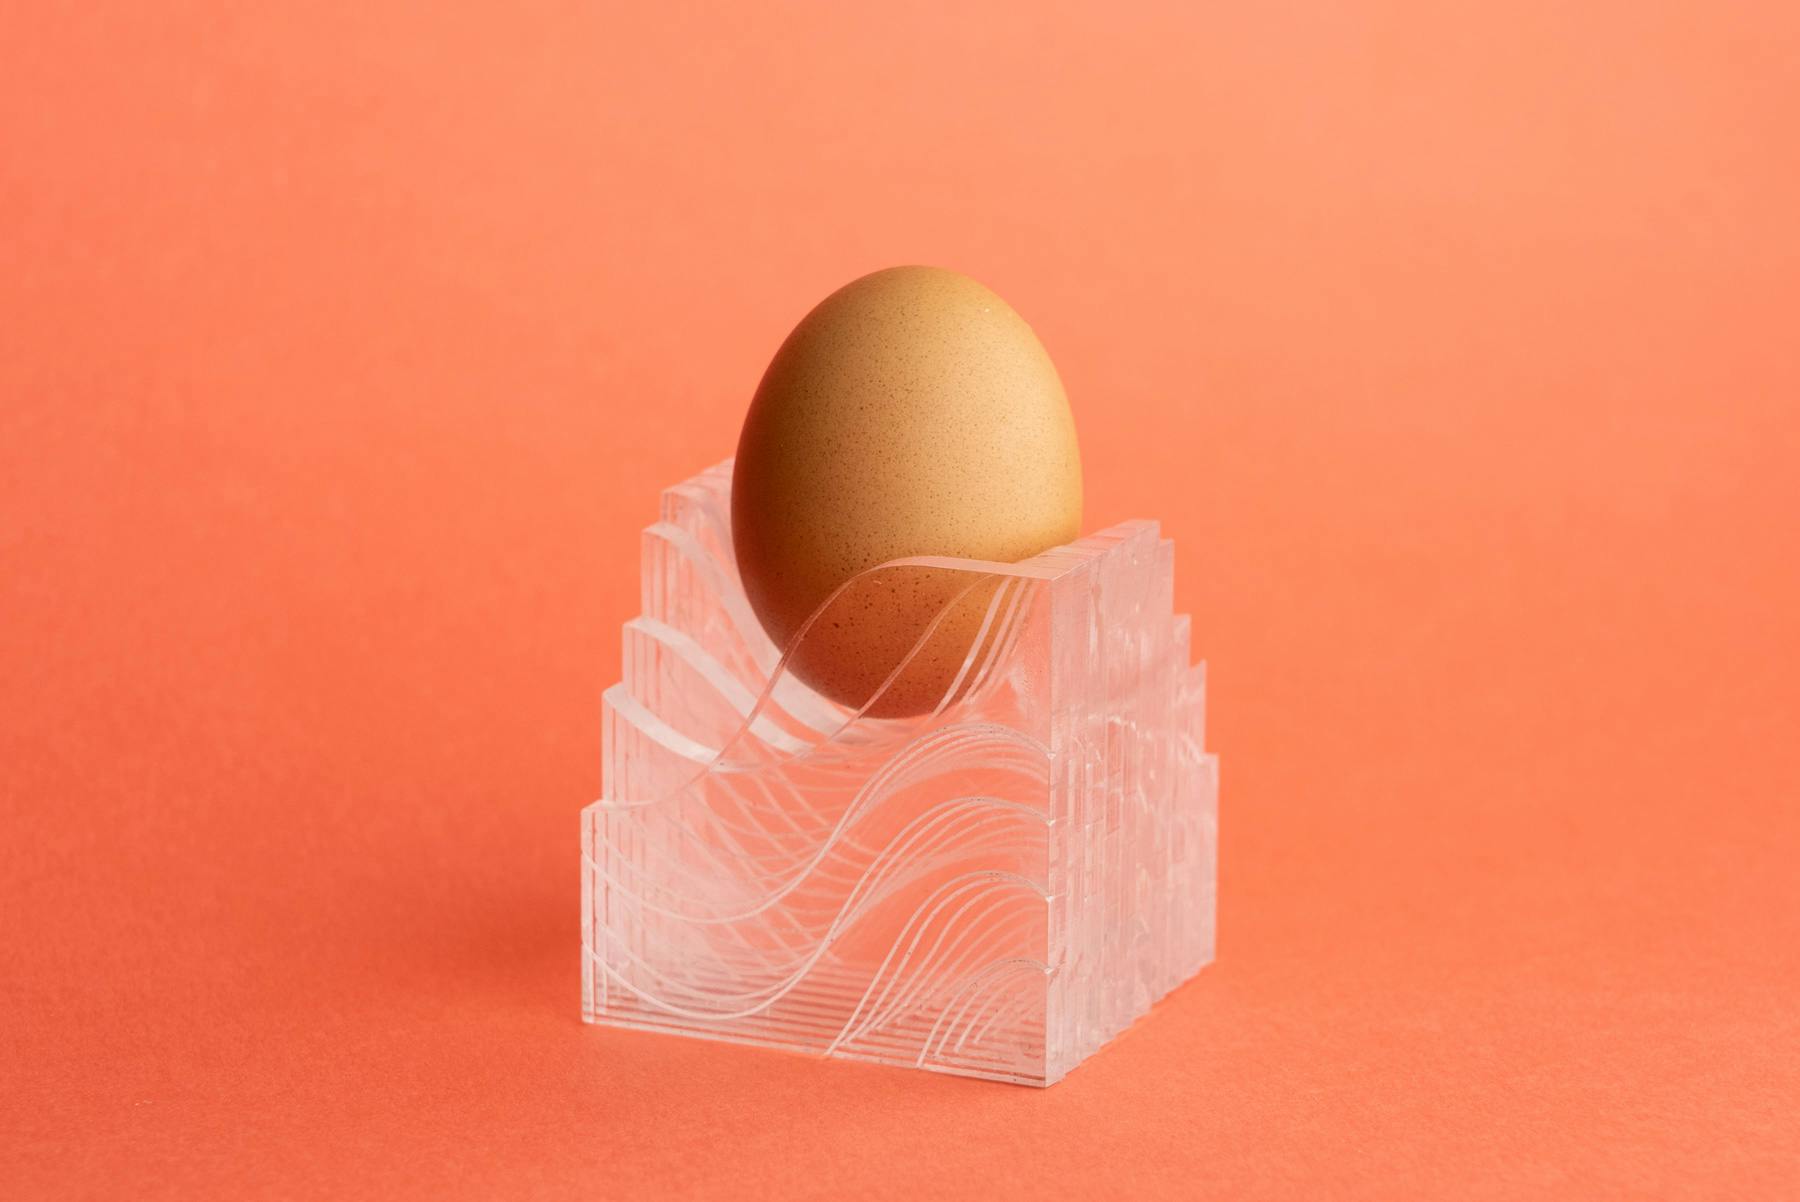 EggHolder 9, an incomplete cube made of stacked acrylic pieces, holding an egg against a salmon-colored background.